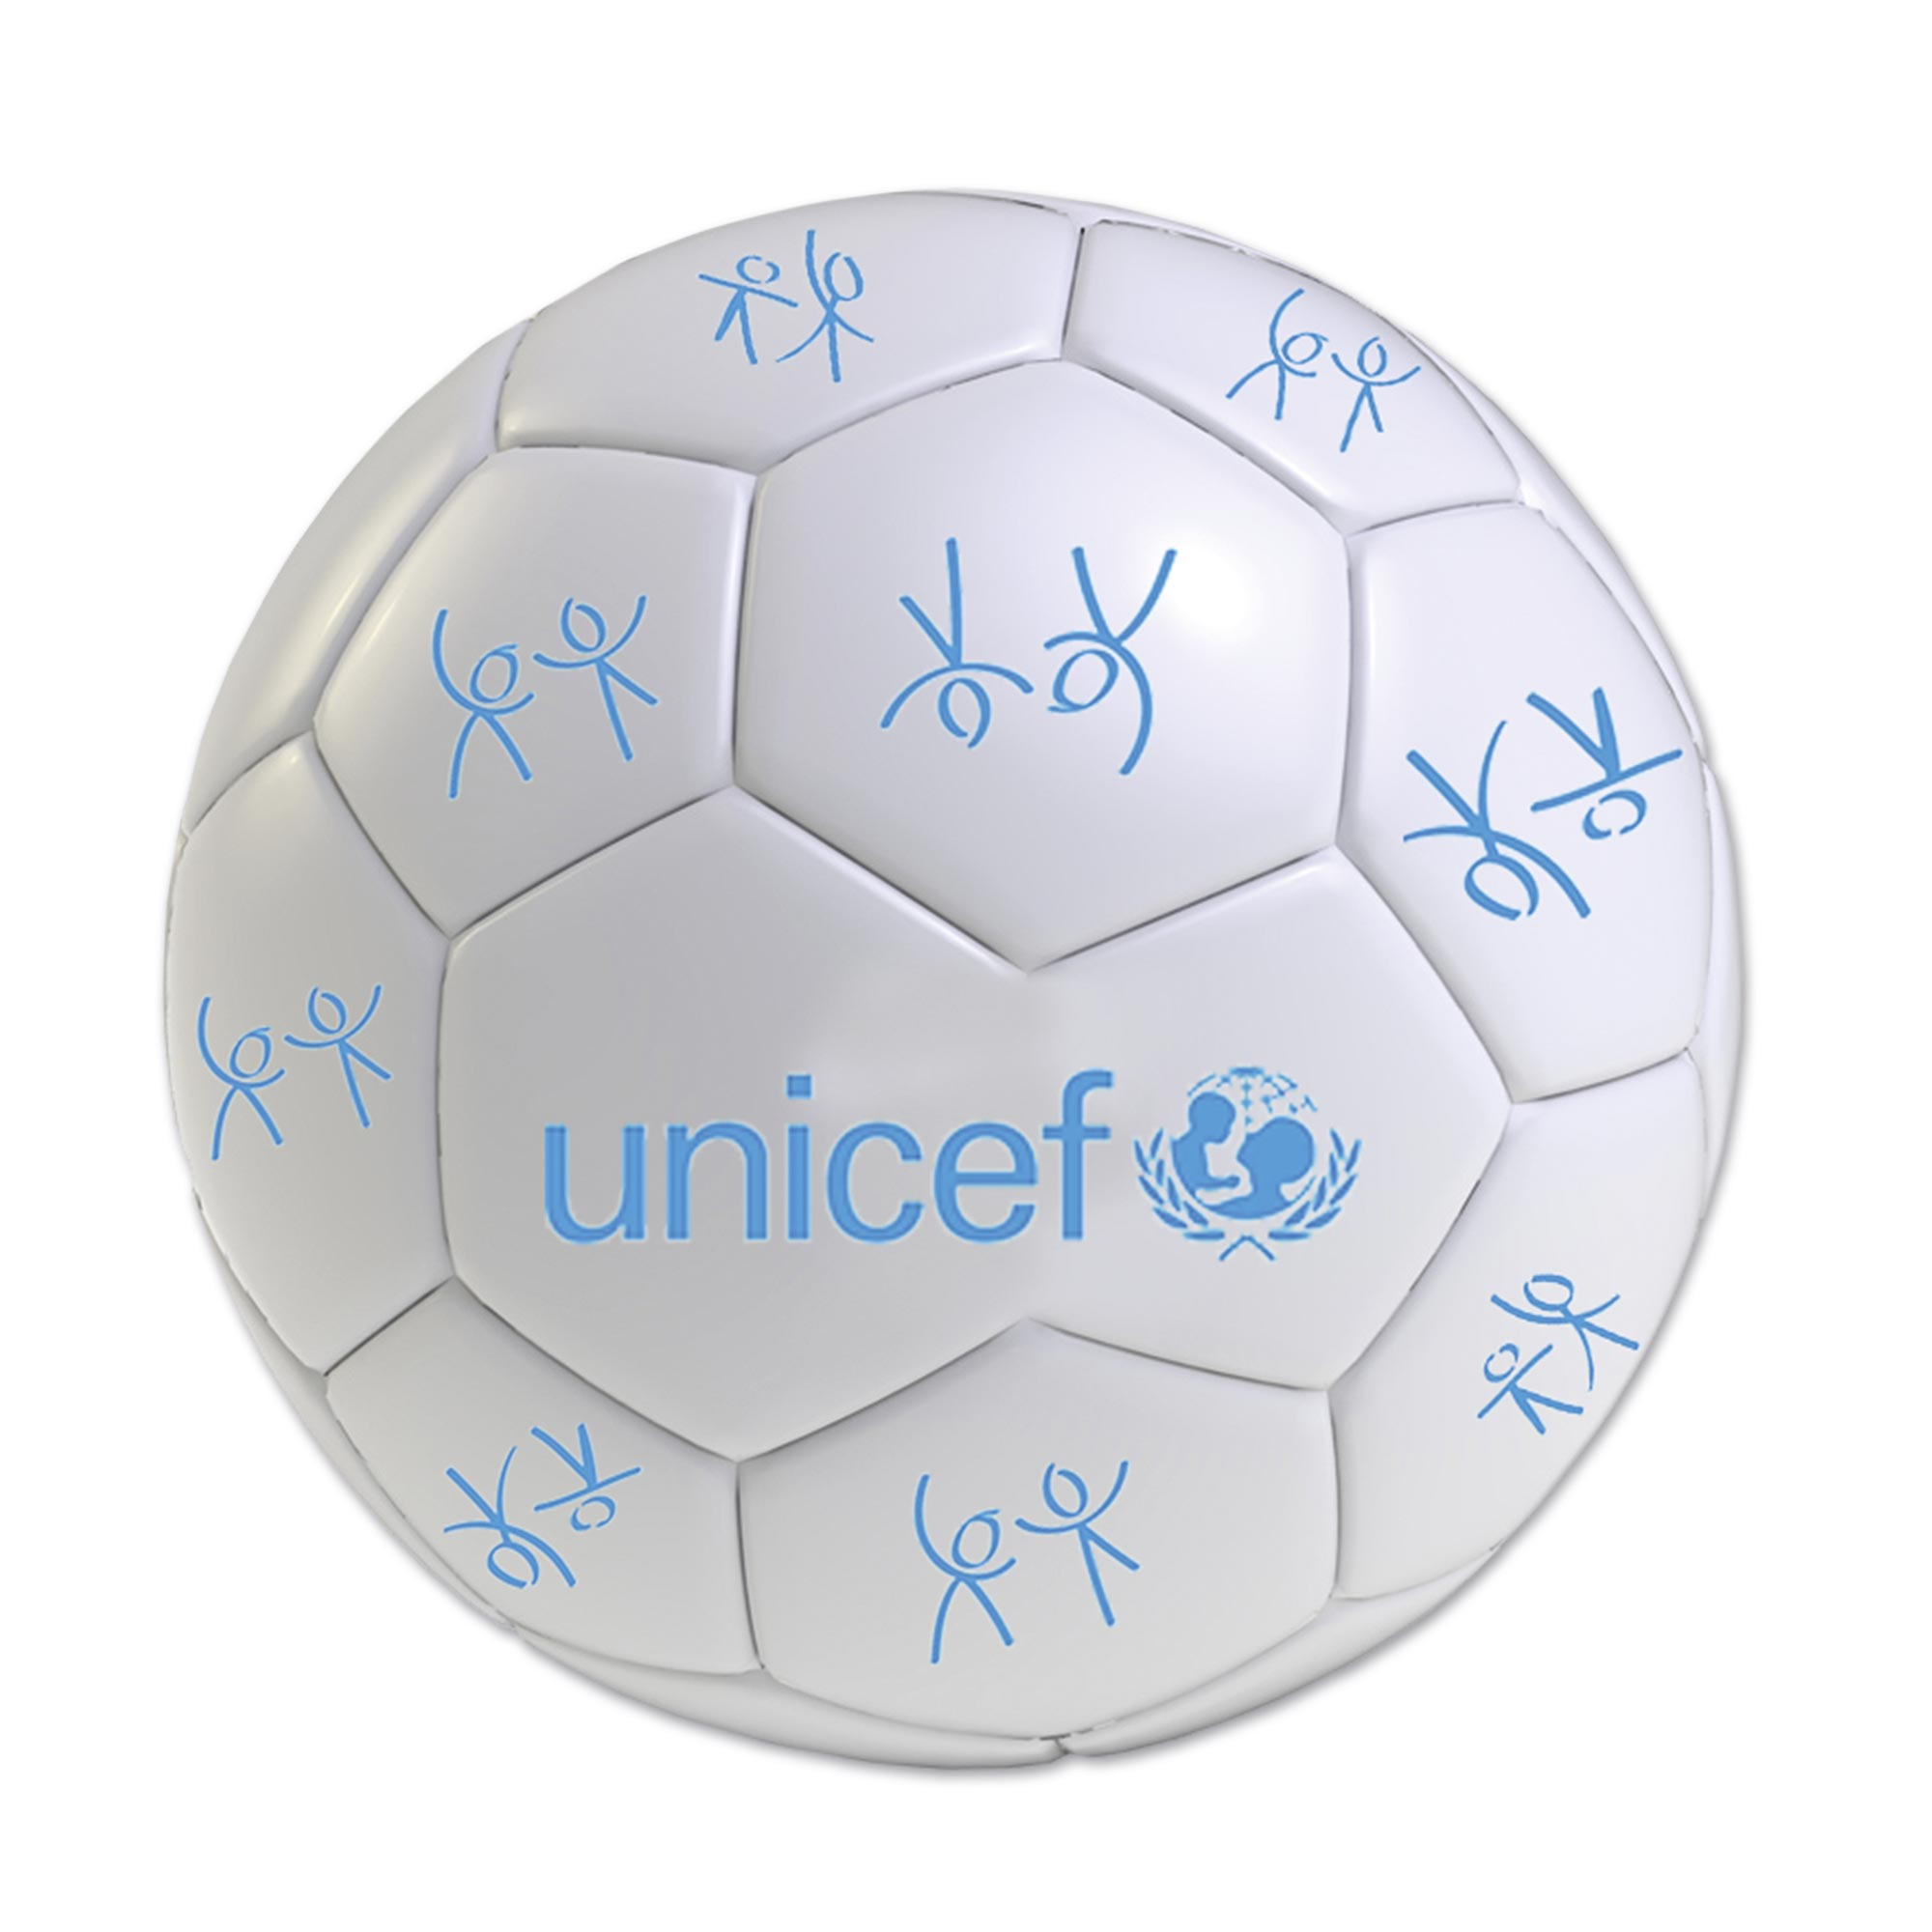 UNICEF Market UNICEF Sports Soccer Ball with Logo Size 3 Goal Time